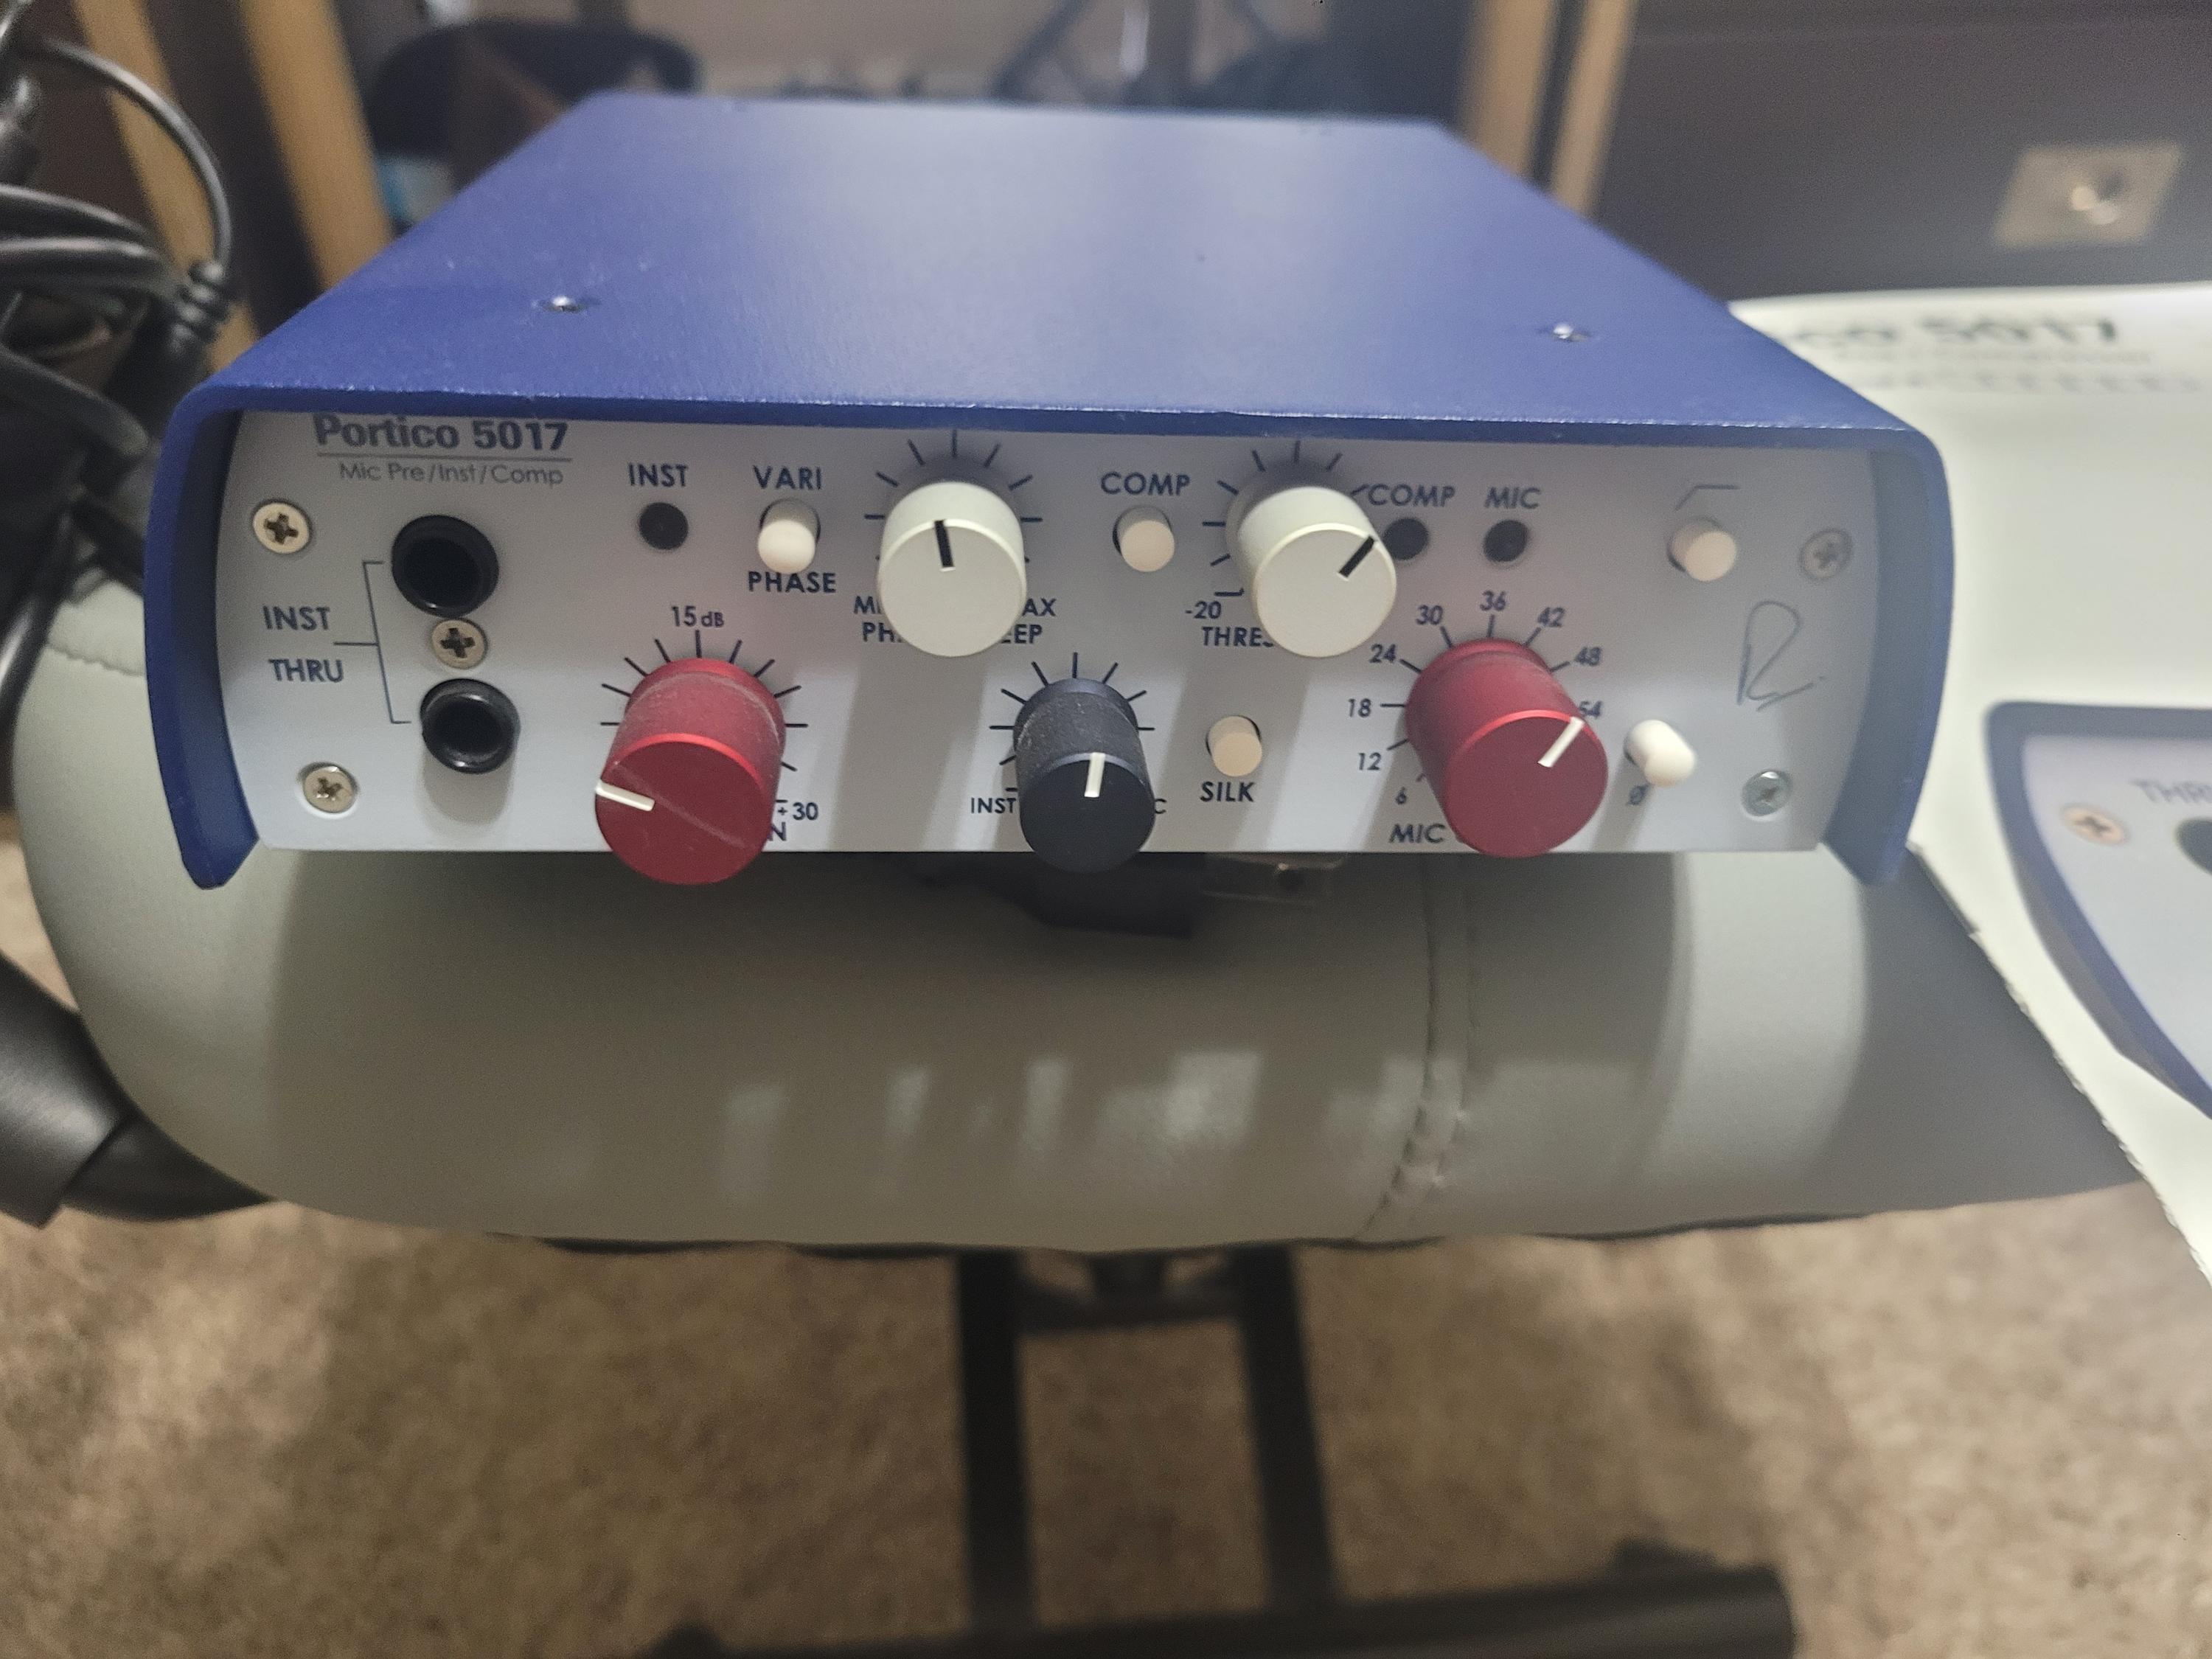 Used Rupert Neve Designs Portico 5017 - Sweetwater's Gear Exchange